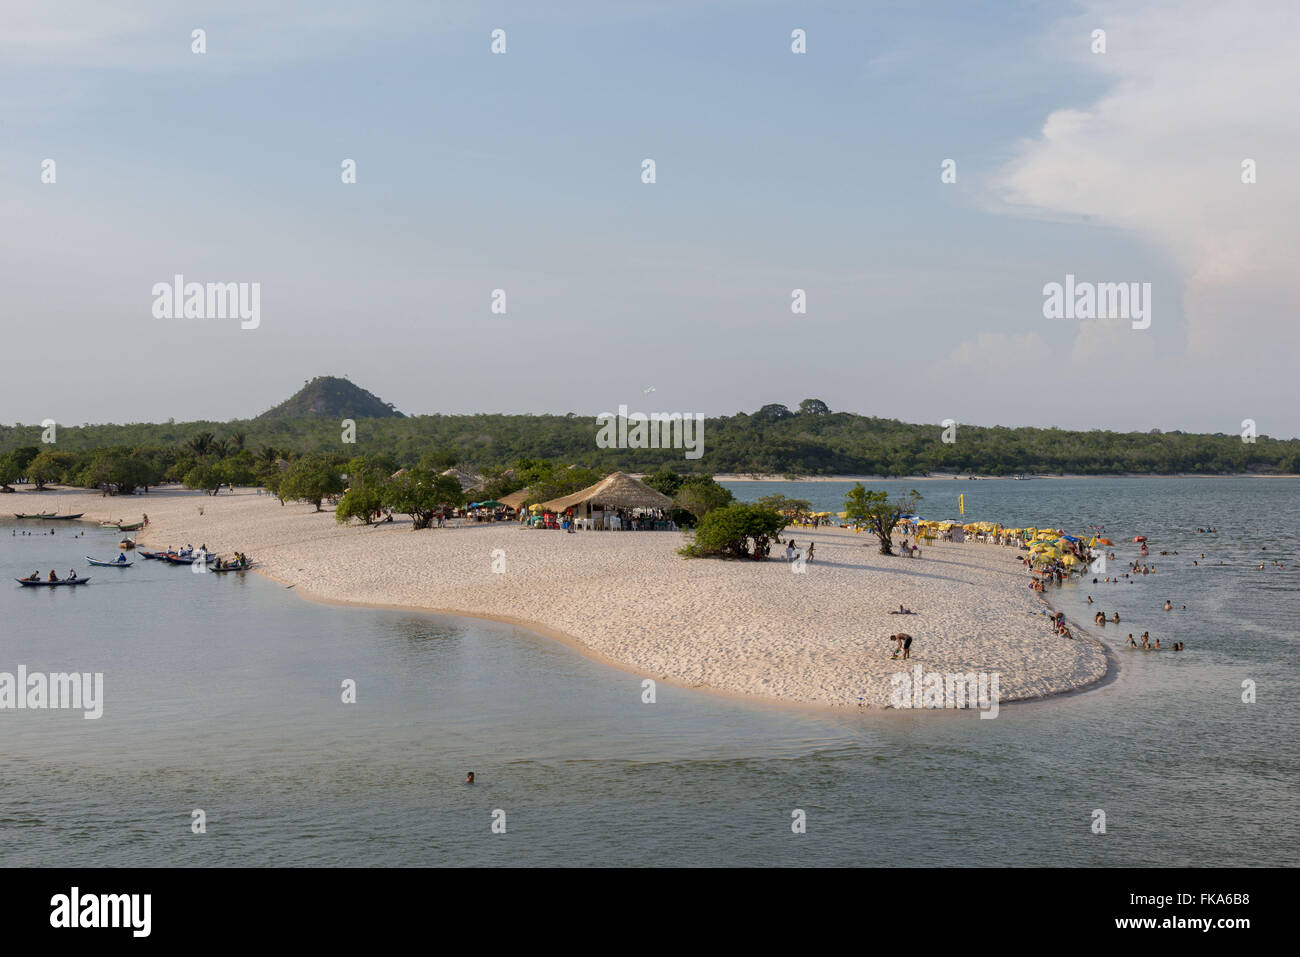 Love Island High Resolution Stock Photography and Images - Alamy